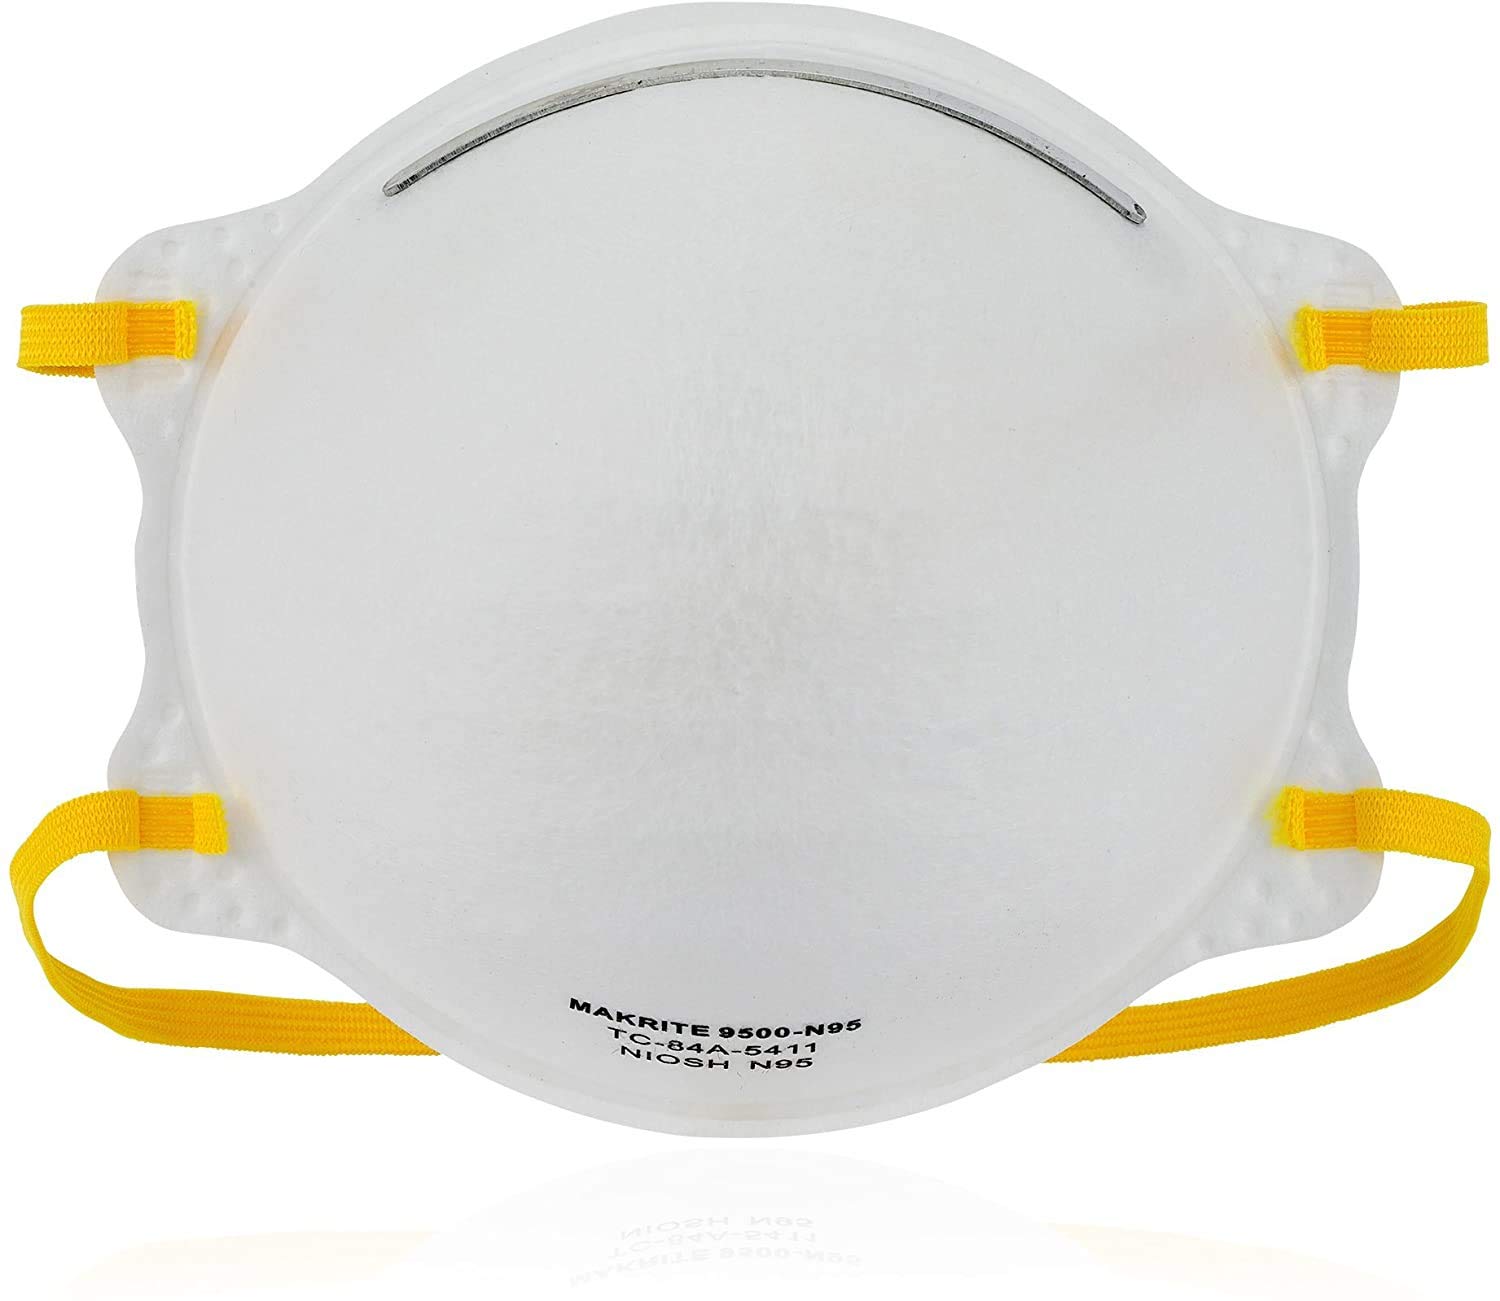 TITAN PROTECT NIOSH Certified MAKRITE 9500-N95 Pre-Formed Cone Particulate Respirator Mask, M/L Size (Pack of 20 Masks)